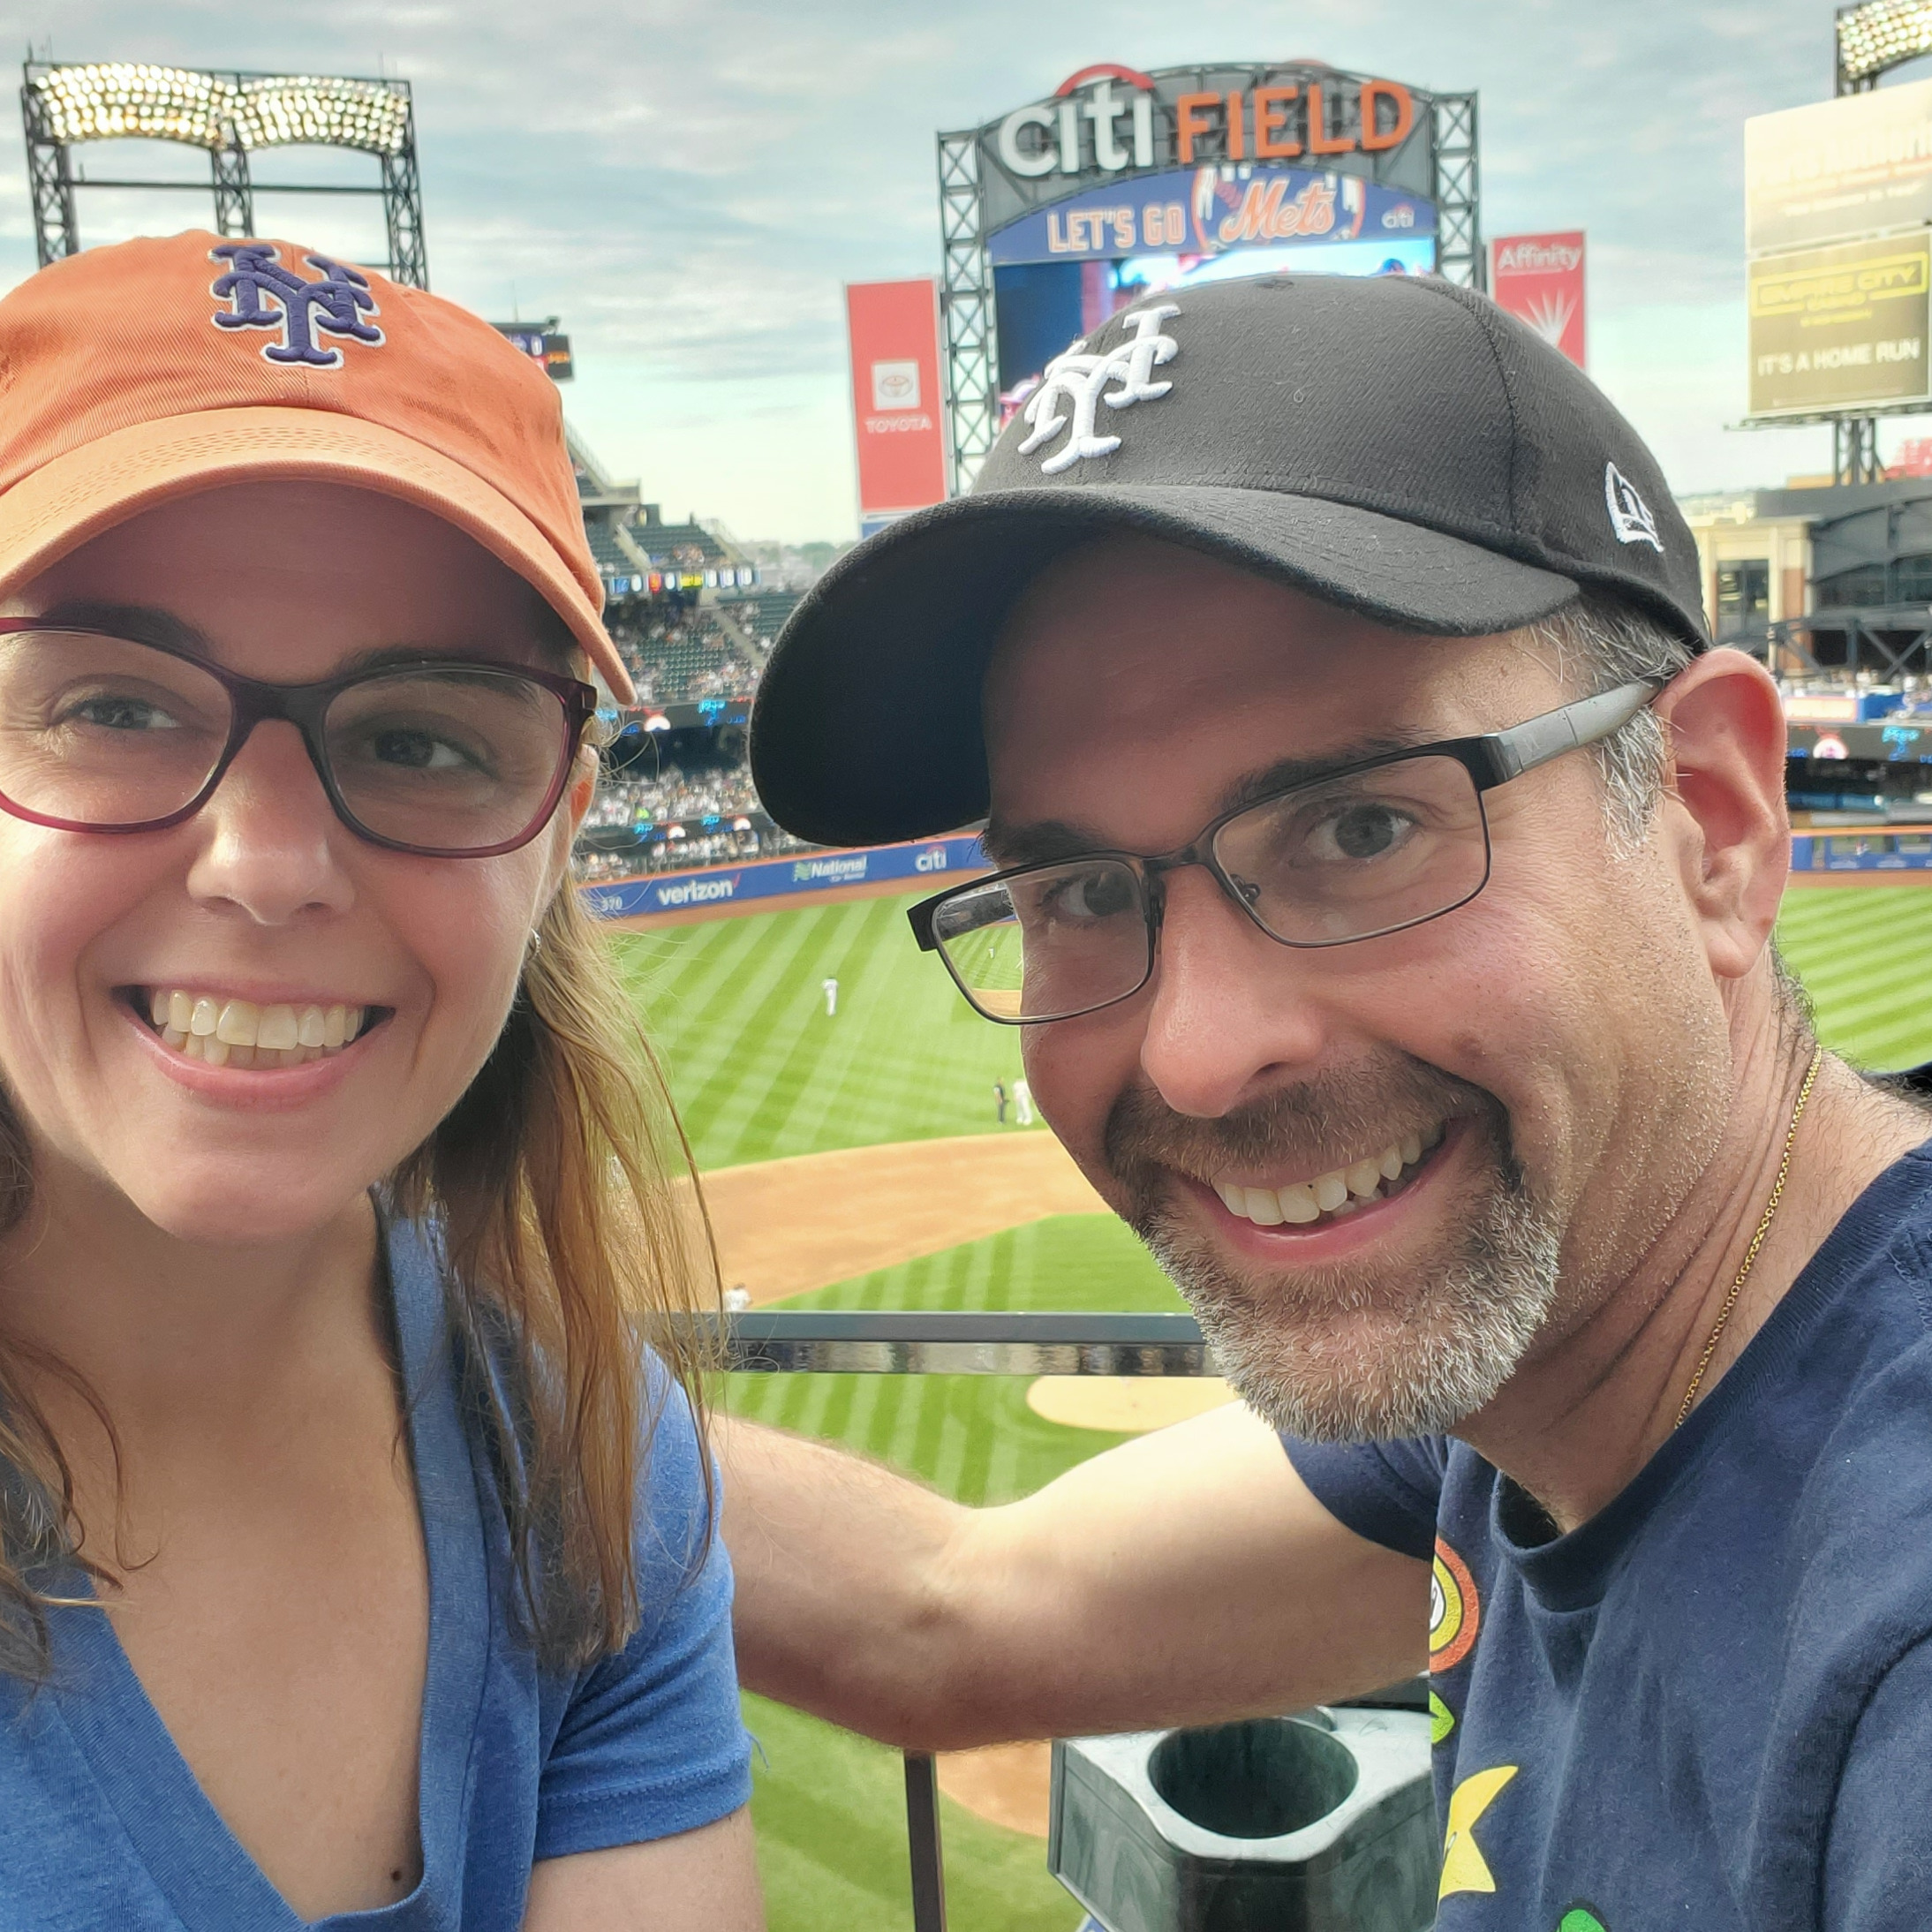 Fun at the Mets game!